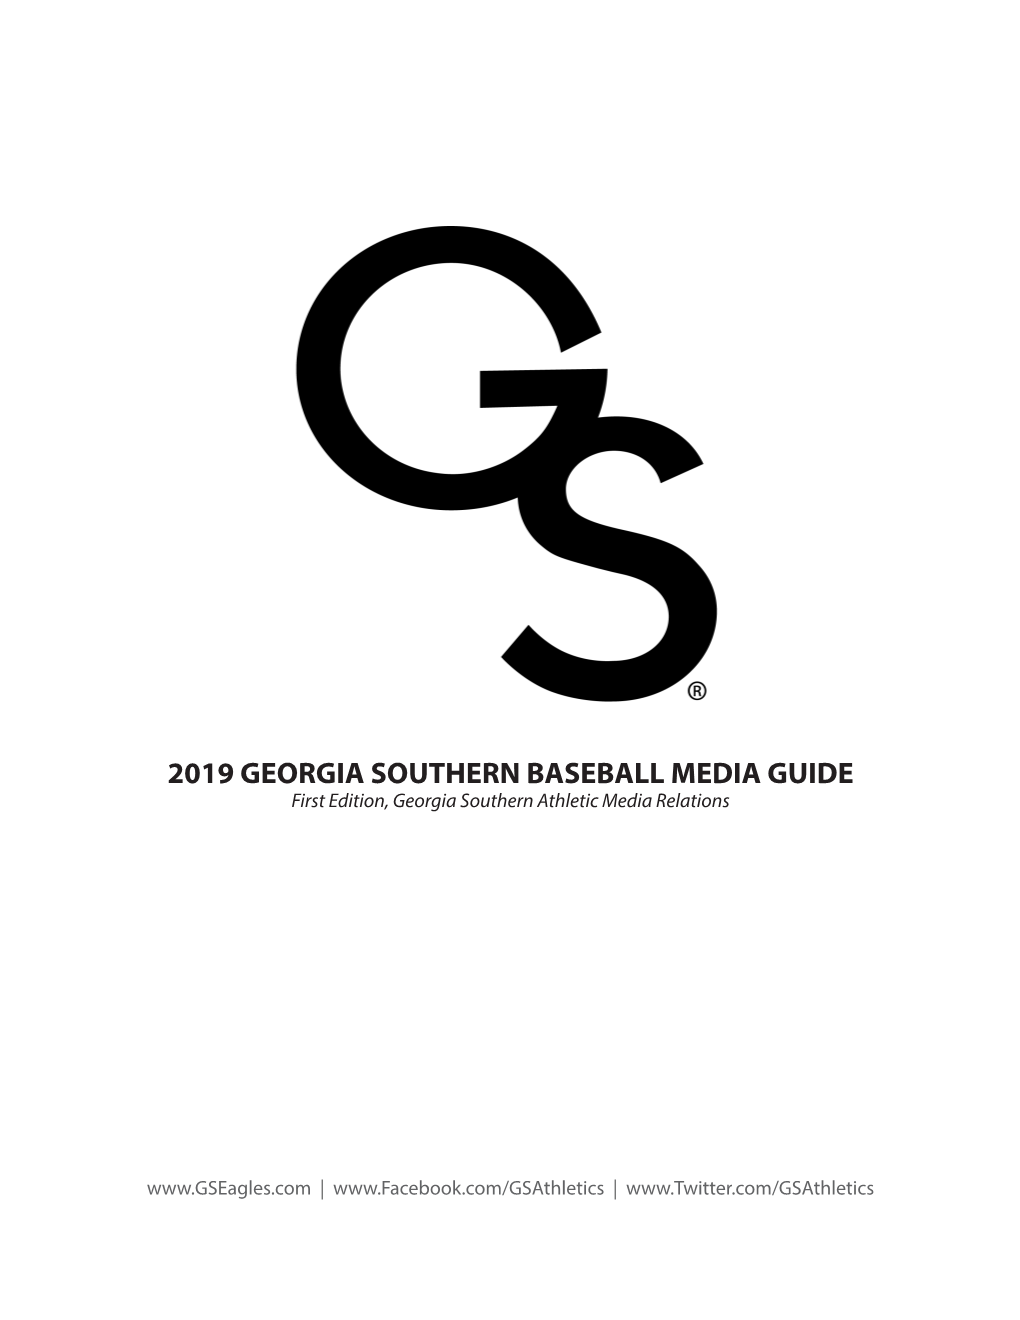 2019 GEORGIA SOUTHERN BASEBALL MEDIA GUIDE First Edition, Georgia Southern Athletic Media Relations